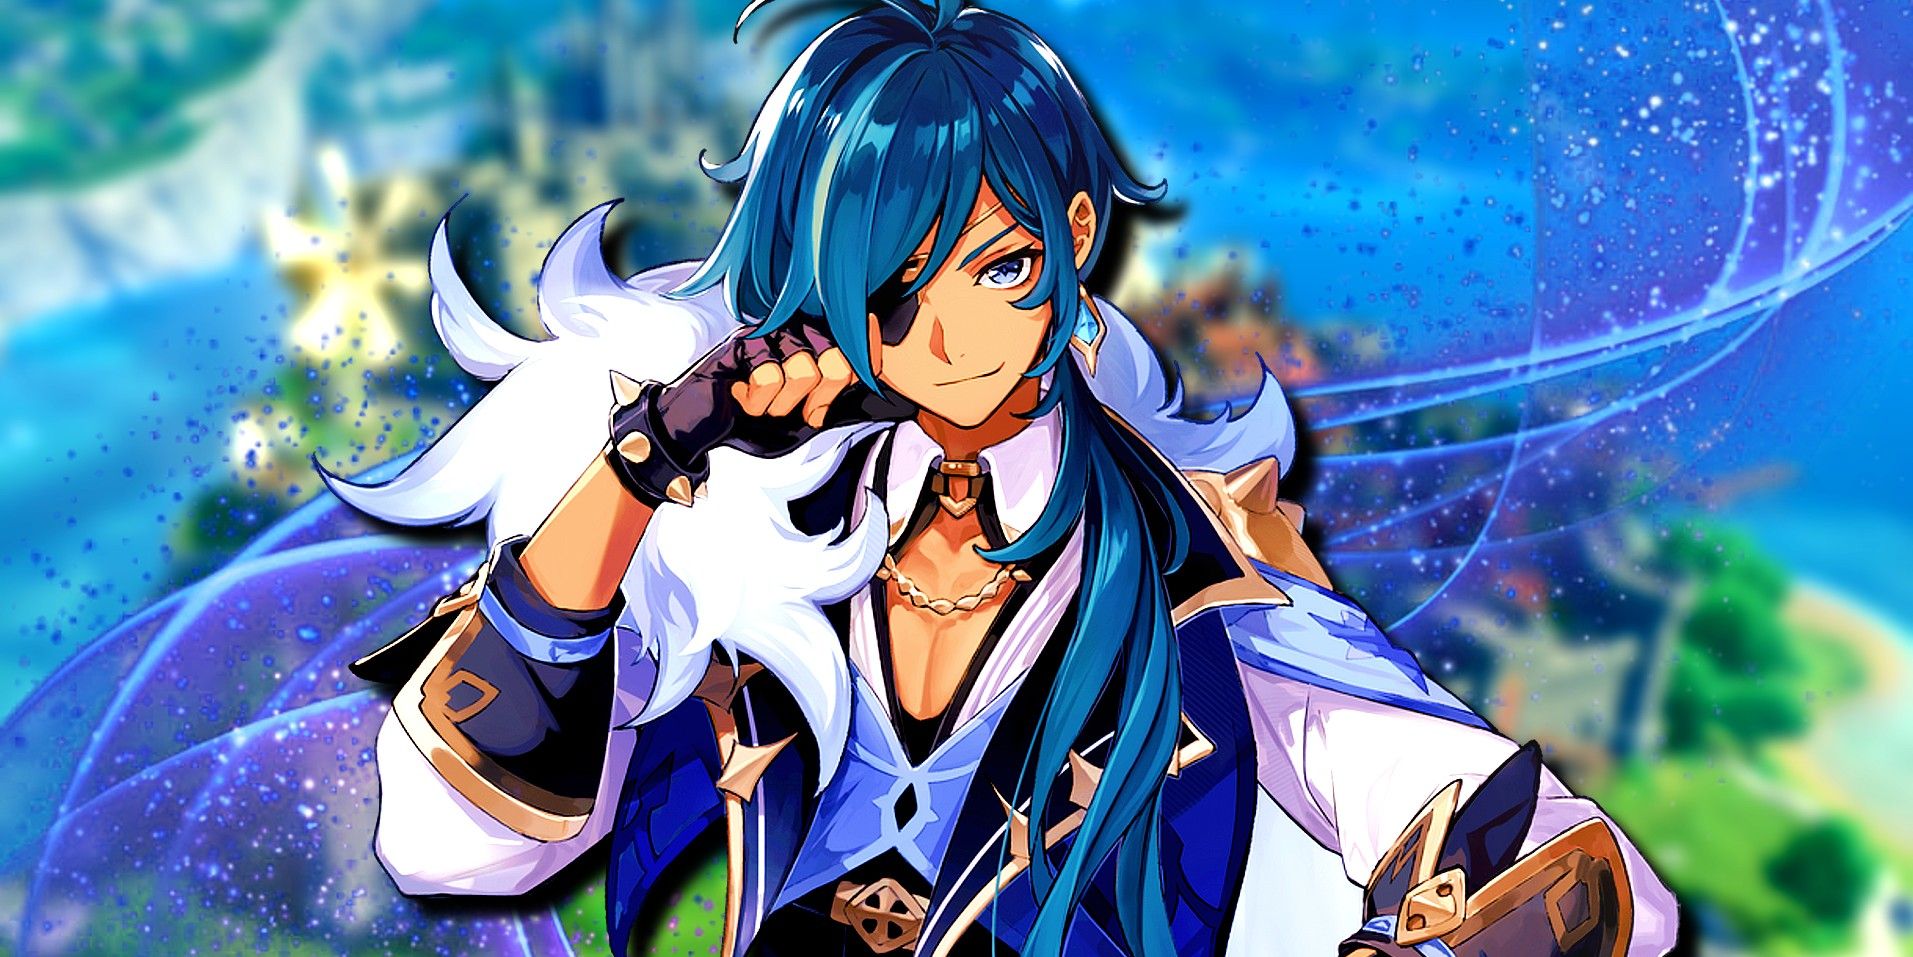 Genshin Impact's Kaeya poses in the middle, with a dark blue energy flowing behind him, both of which are superimposed over a blurred-out image of Mondstadt City.